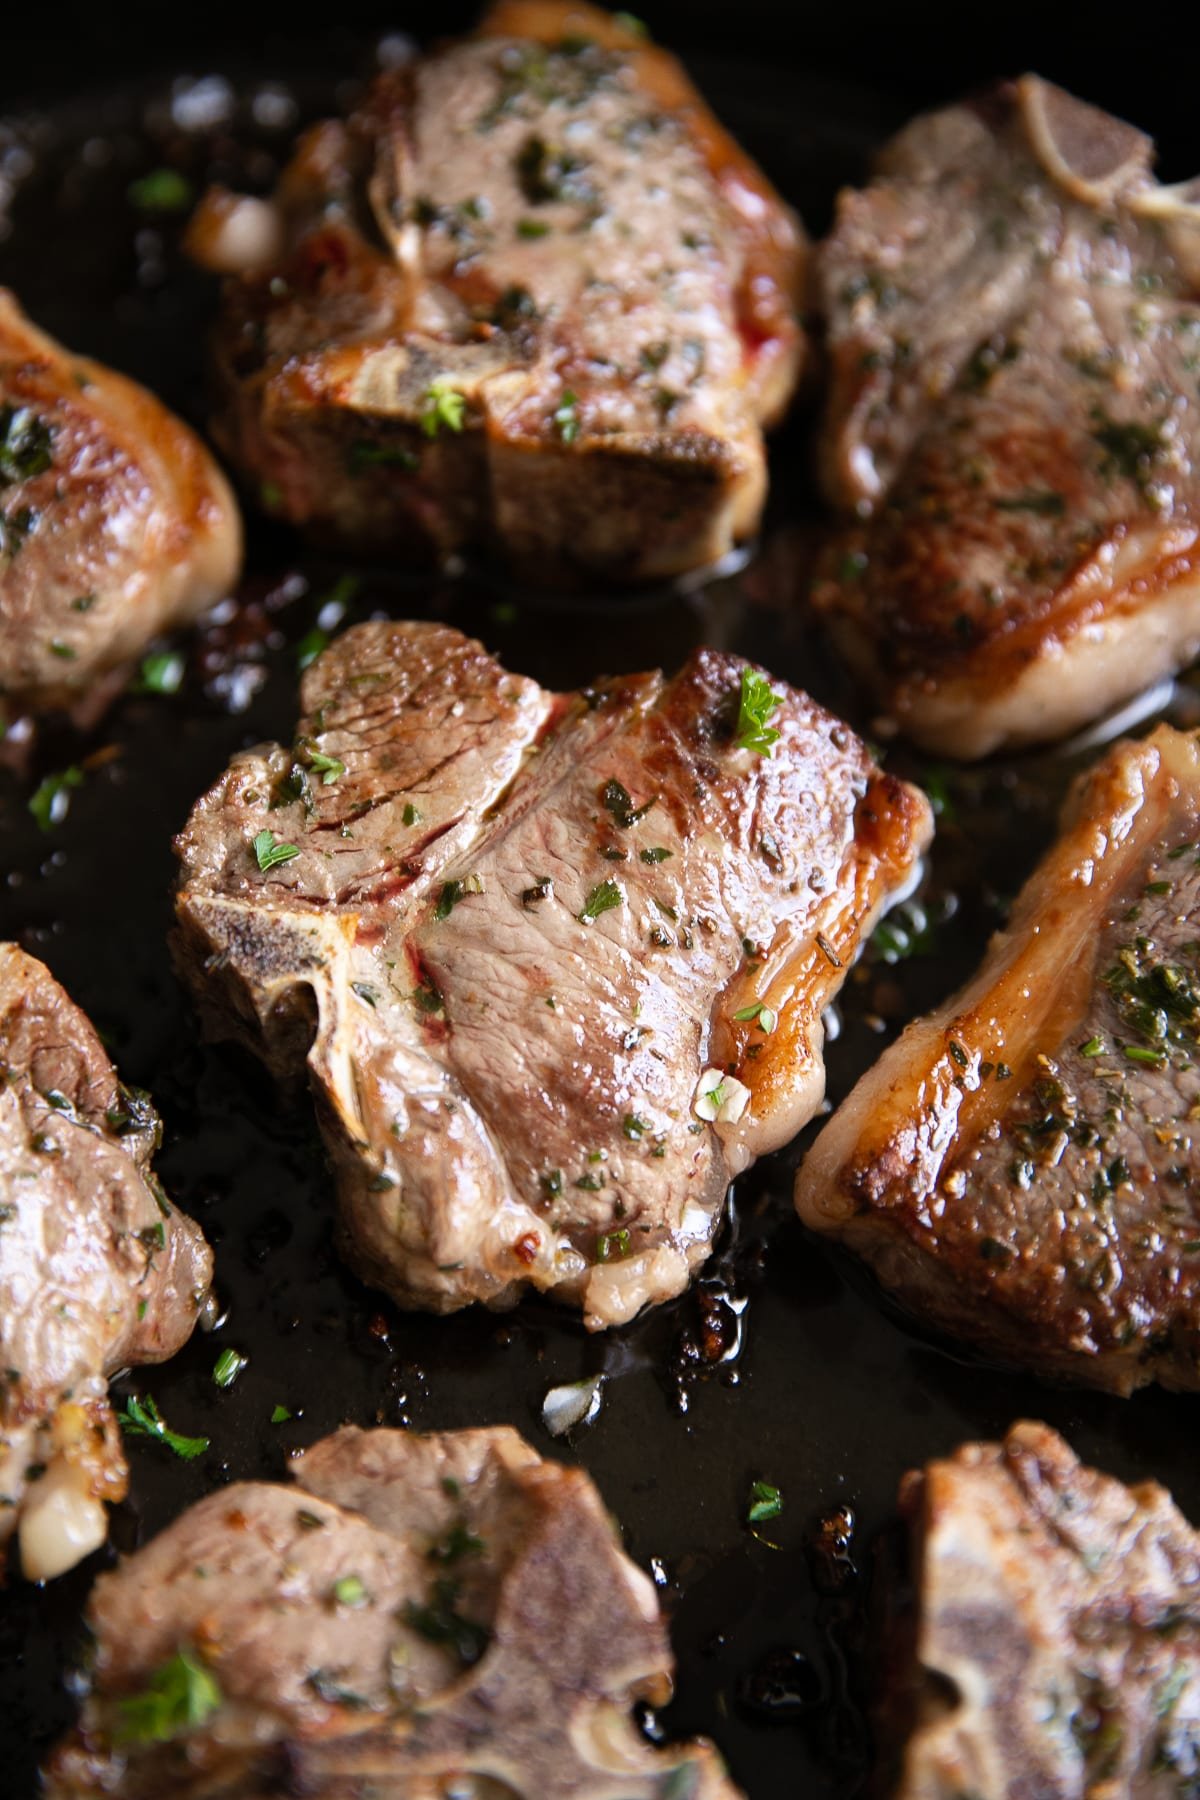 Six Garlic and herb marinated lamb chops cooking in a large cast-iron skillet.